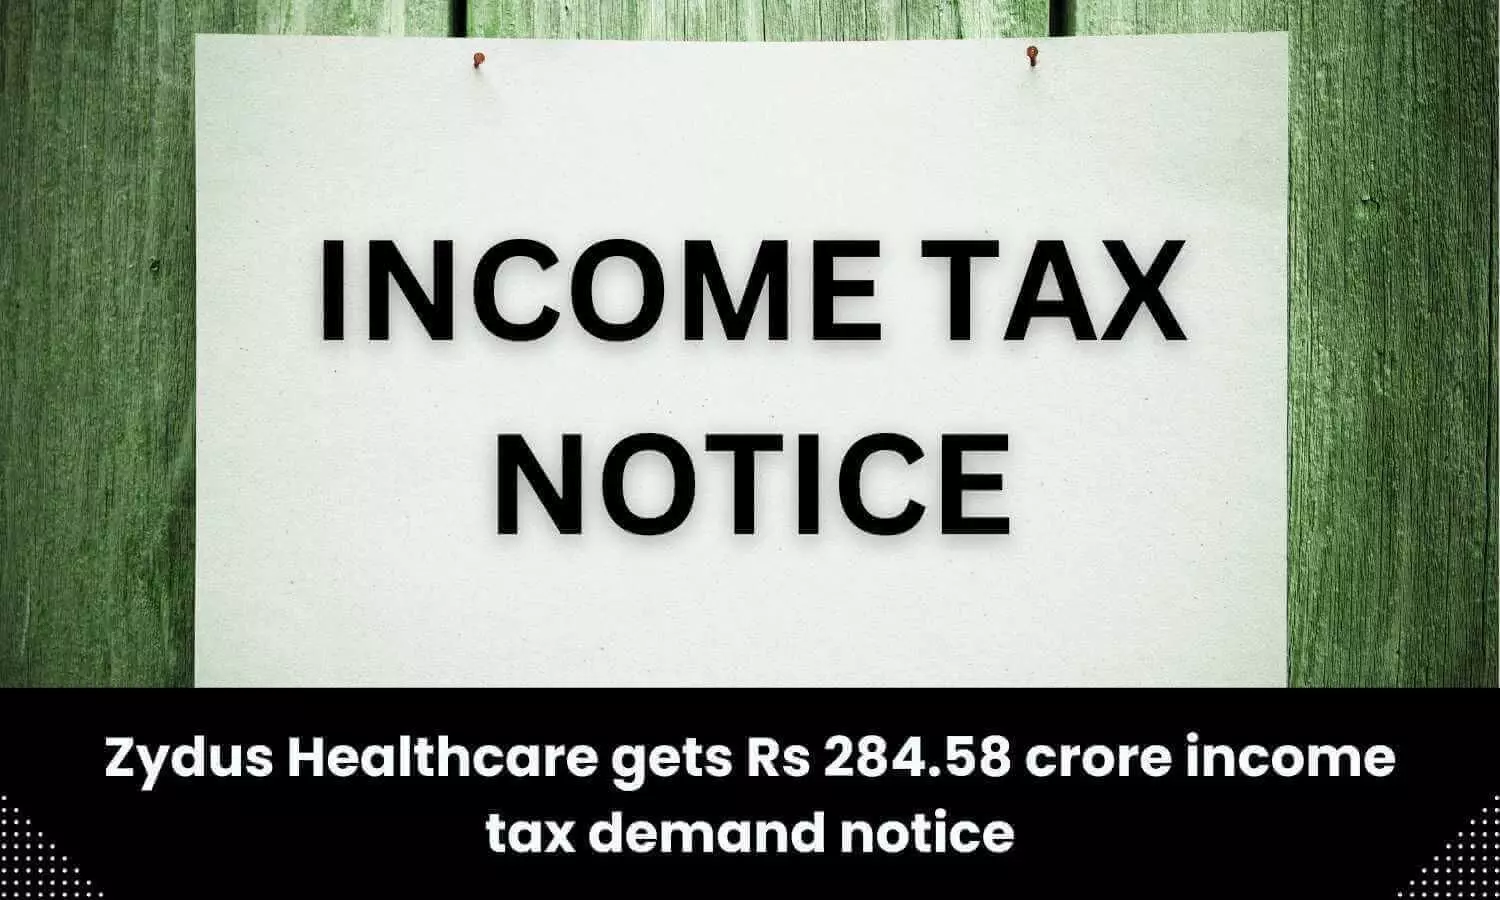 Zydus Healthcare gets Rs 284.58 crore income tax demand notice